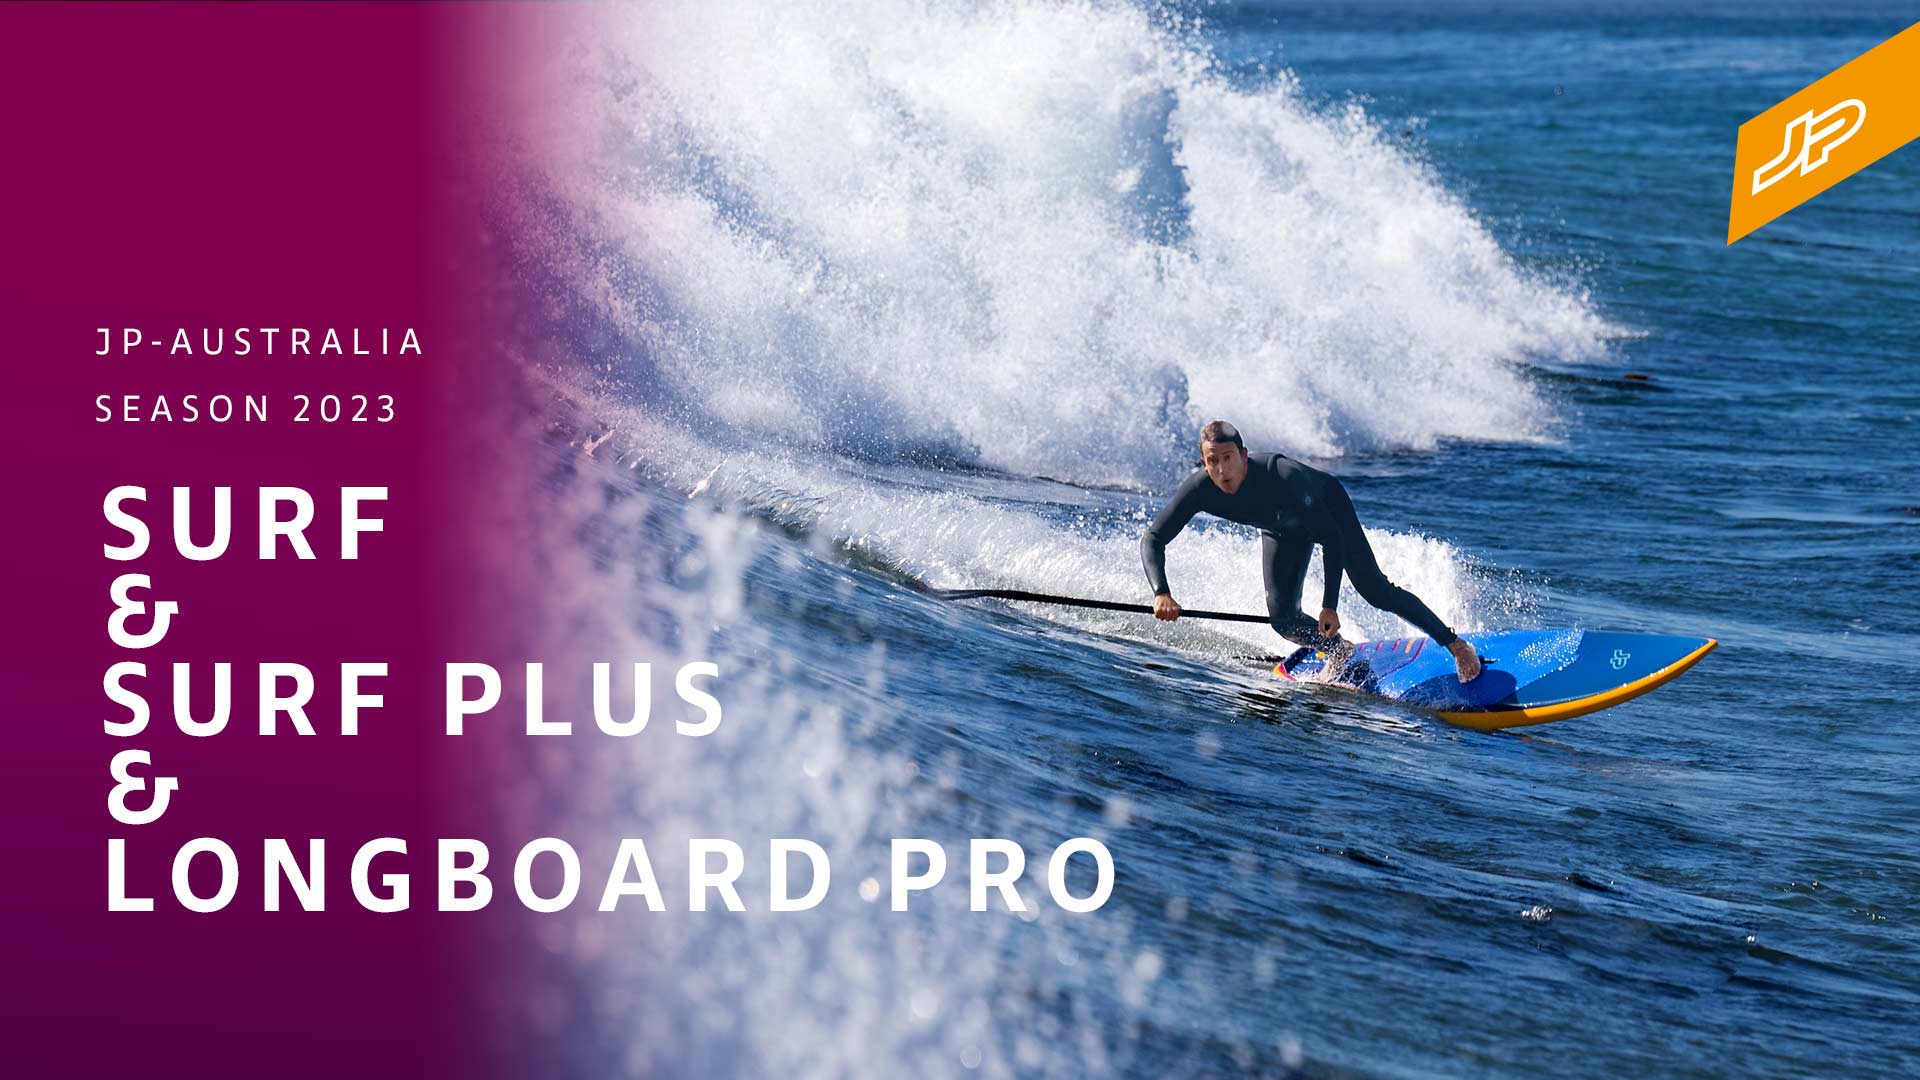 Fusion - JP Australia - They love the waves, SUP surfing